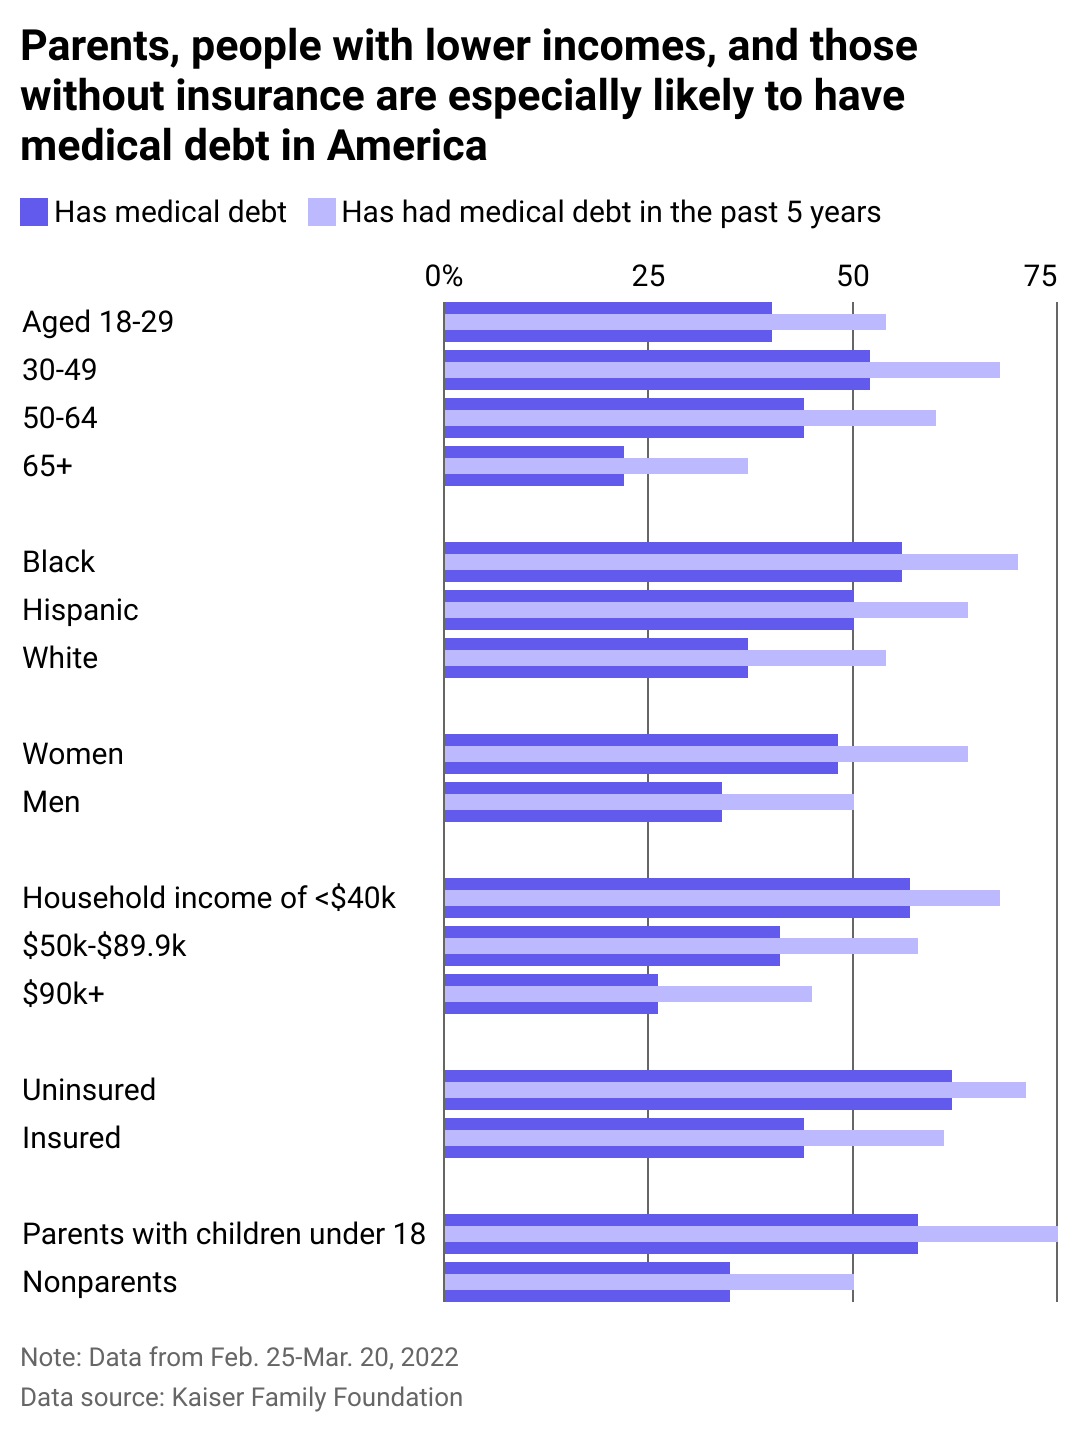 Bar chart showing various demographic groups that carry the most medical debt in the U.S. Parents with children under 18, households with incomes under $40K a year, and uninsured people have higher medical debt.